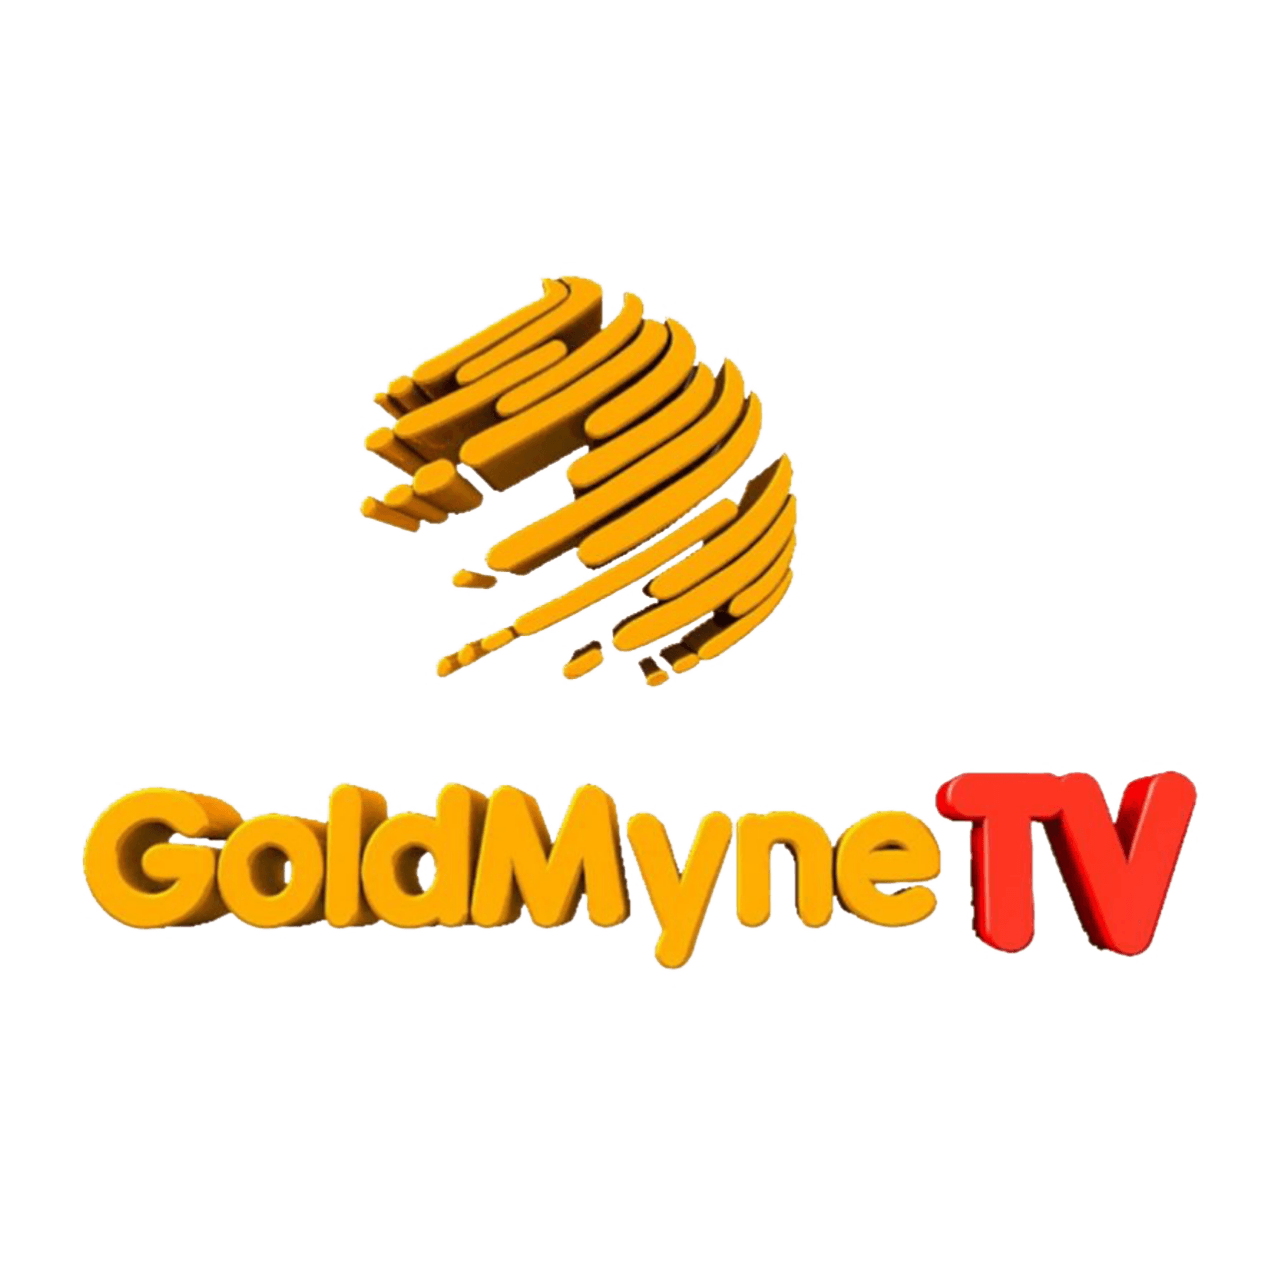 Kaffy has worked with GoldMyneTV Company and brand